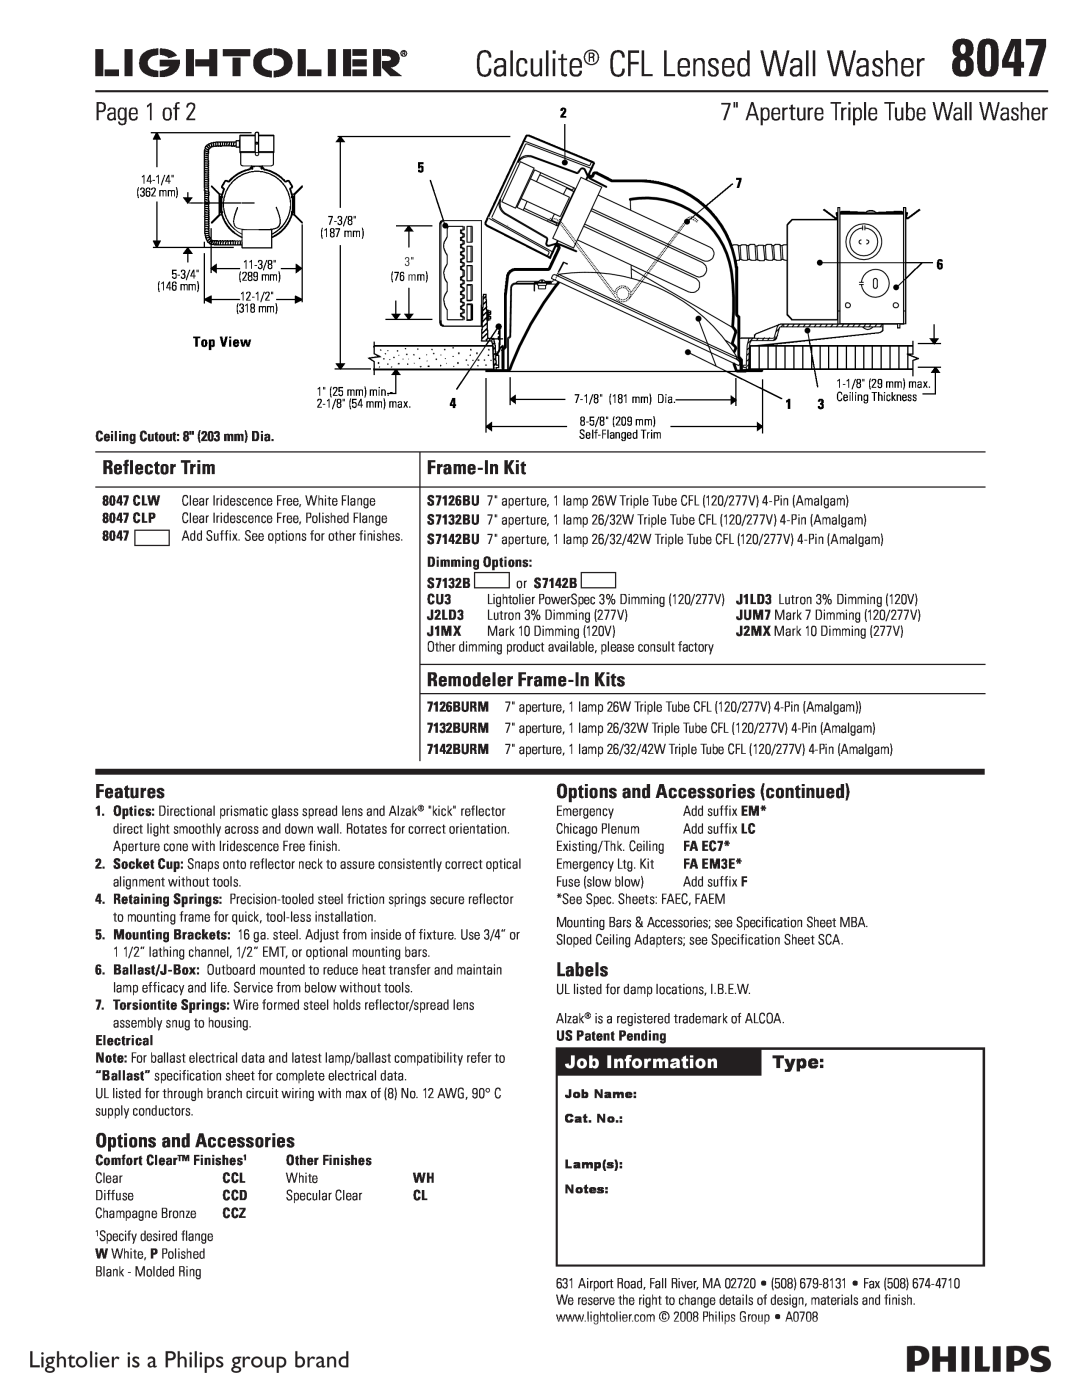 Lightolier 8047 specifications Page 1 of, Lightolier is a Philips group brand, Aperture Triple Tube Wall Washer, Features 